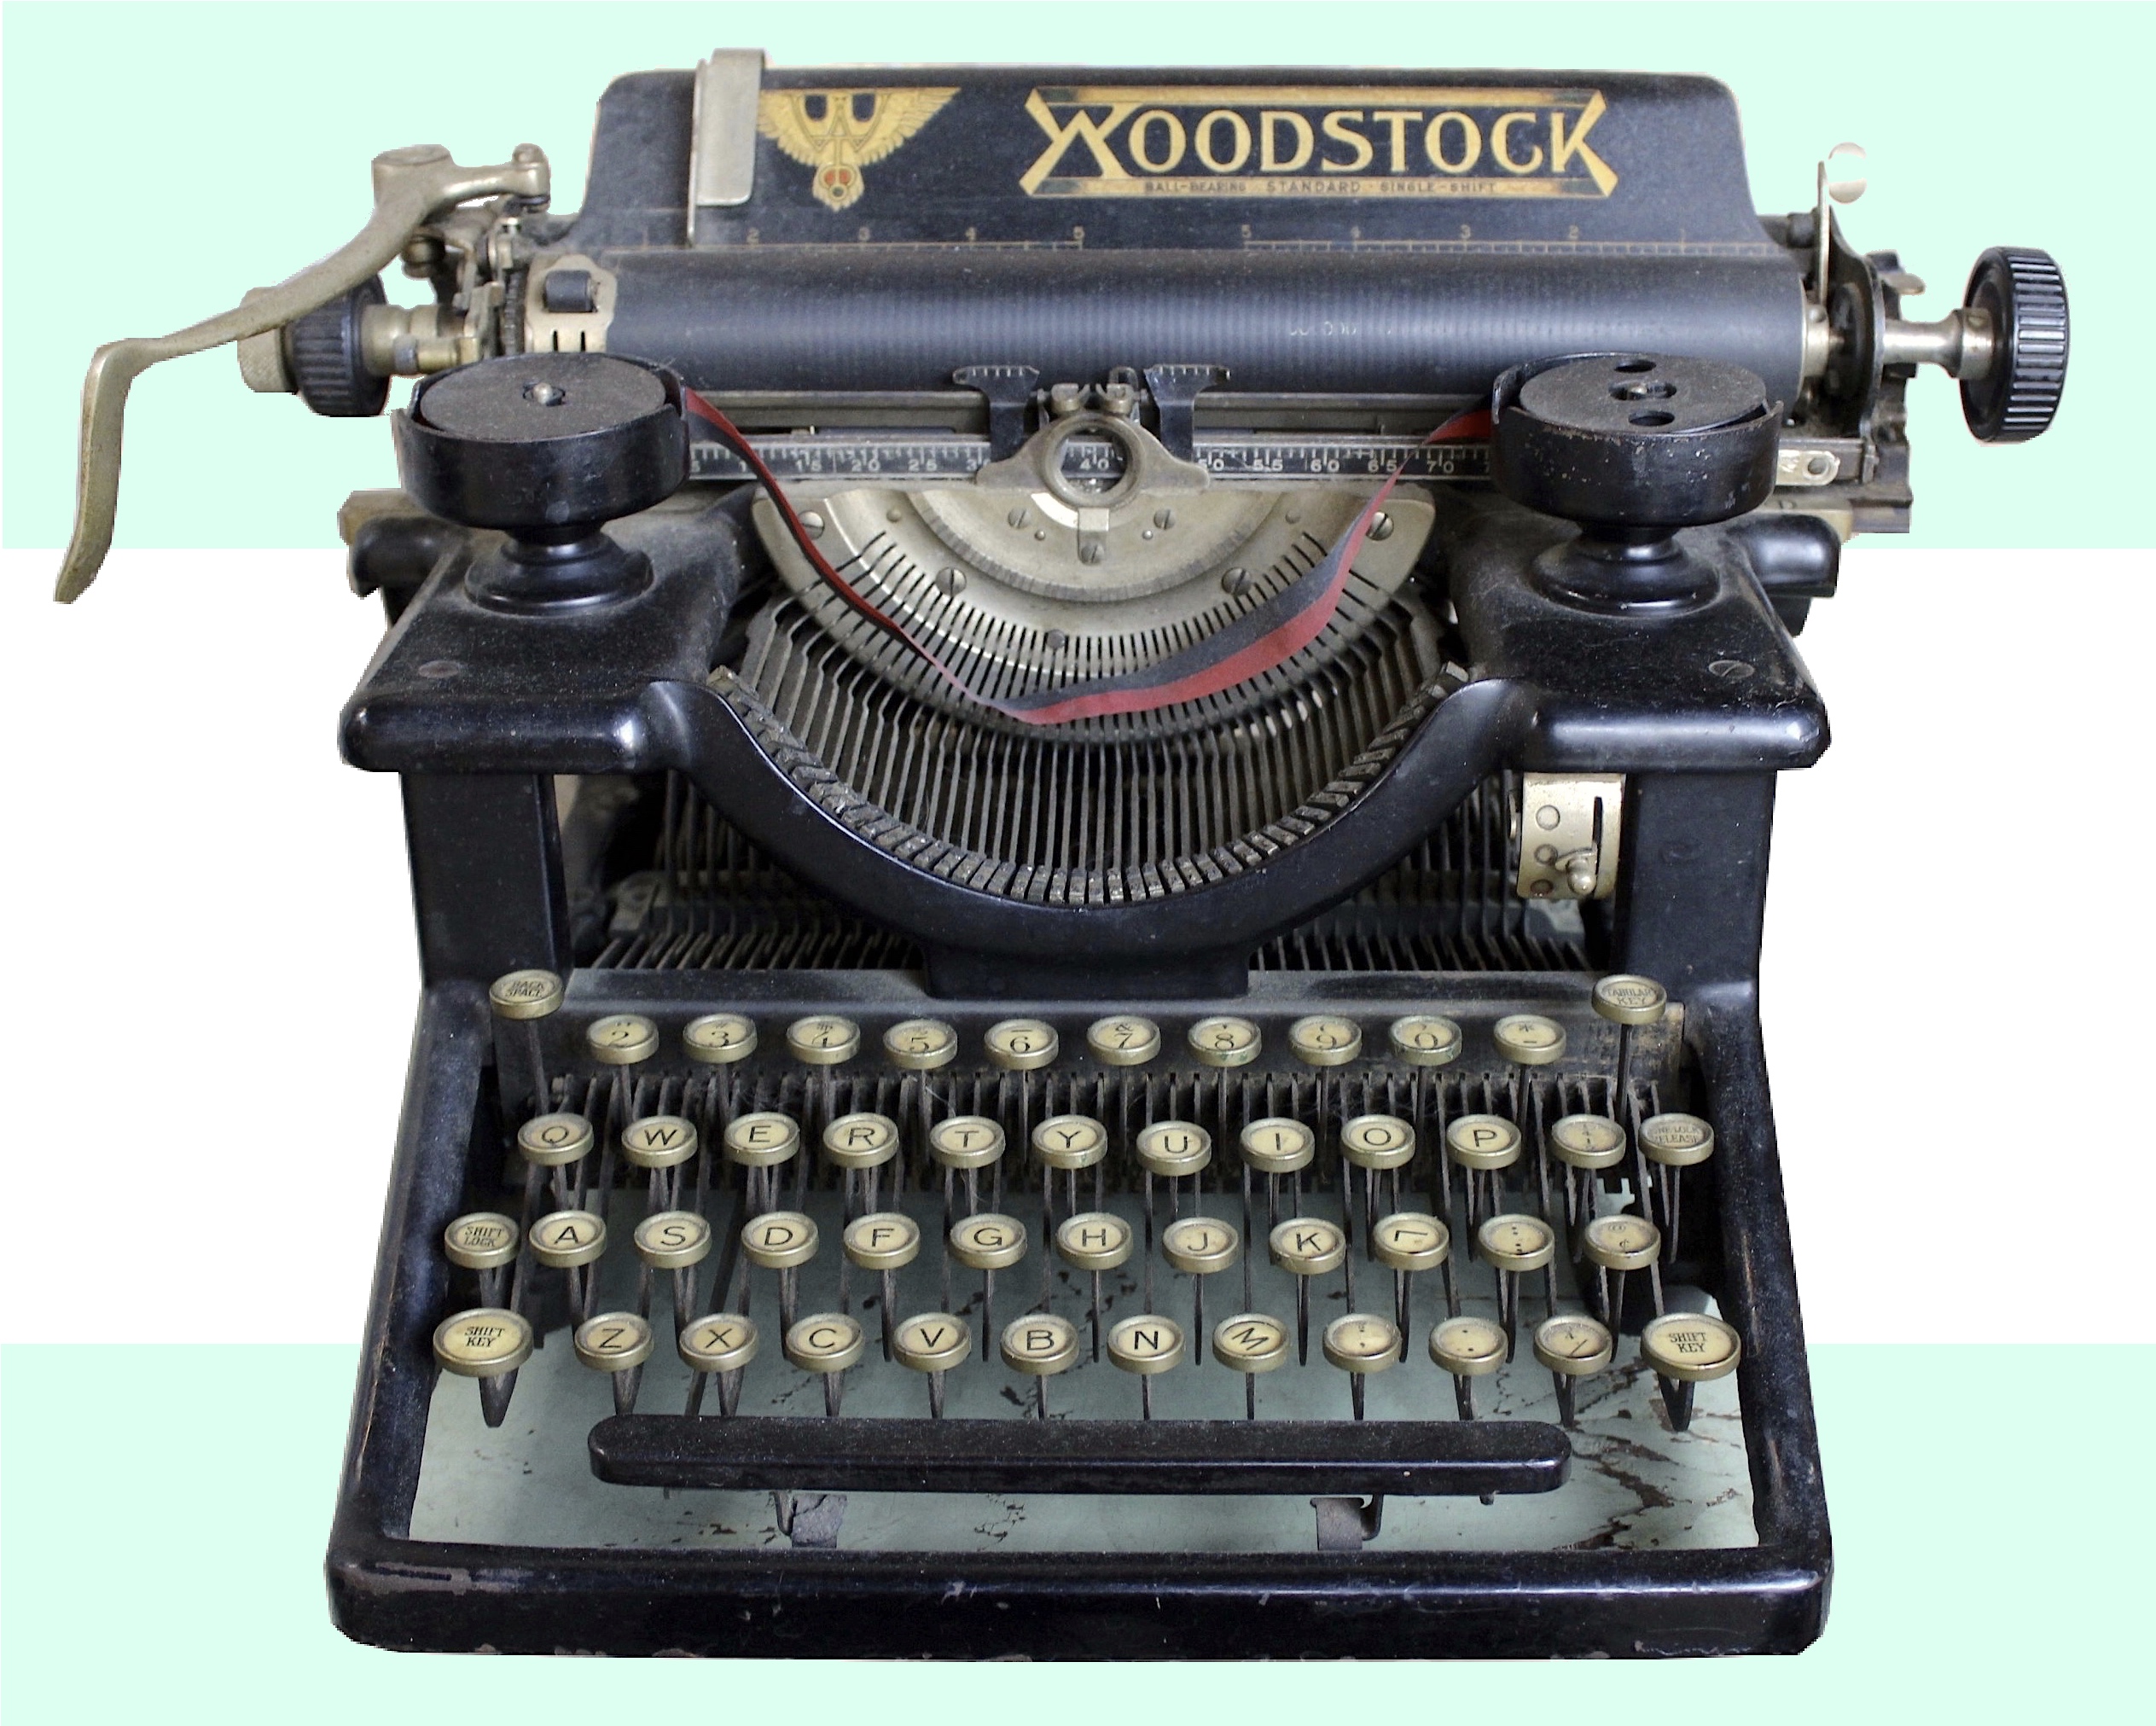 Woodstock Typewriter Co., est. 1907 - Made-in-Chicago Museum